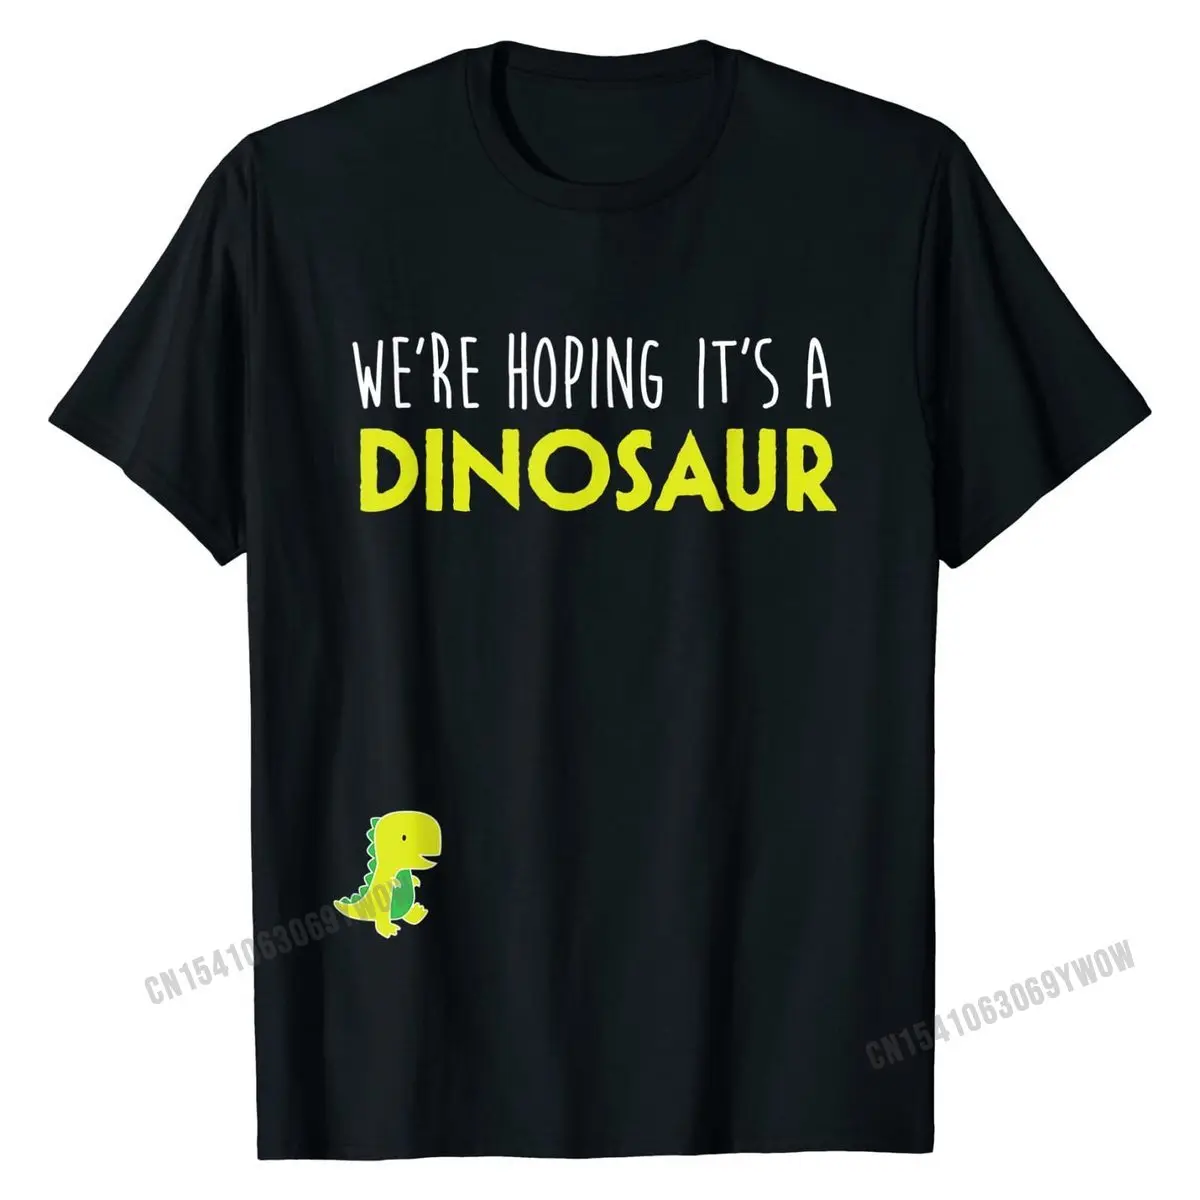 

We're Hoping Dinosaur T Shirt, Funny Pregnancy Announcement Cotton T Shirts for Men Party T Shirt Latest Printed On